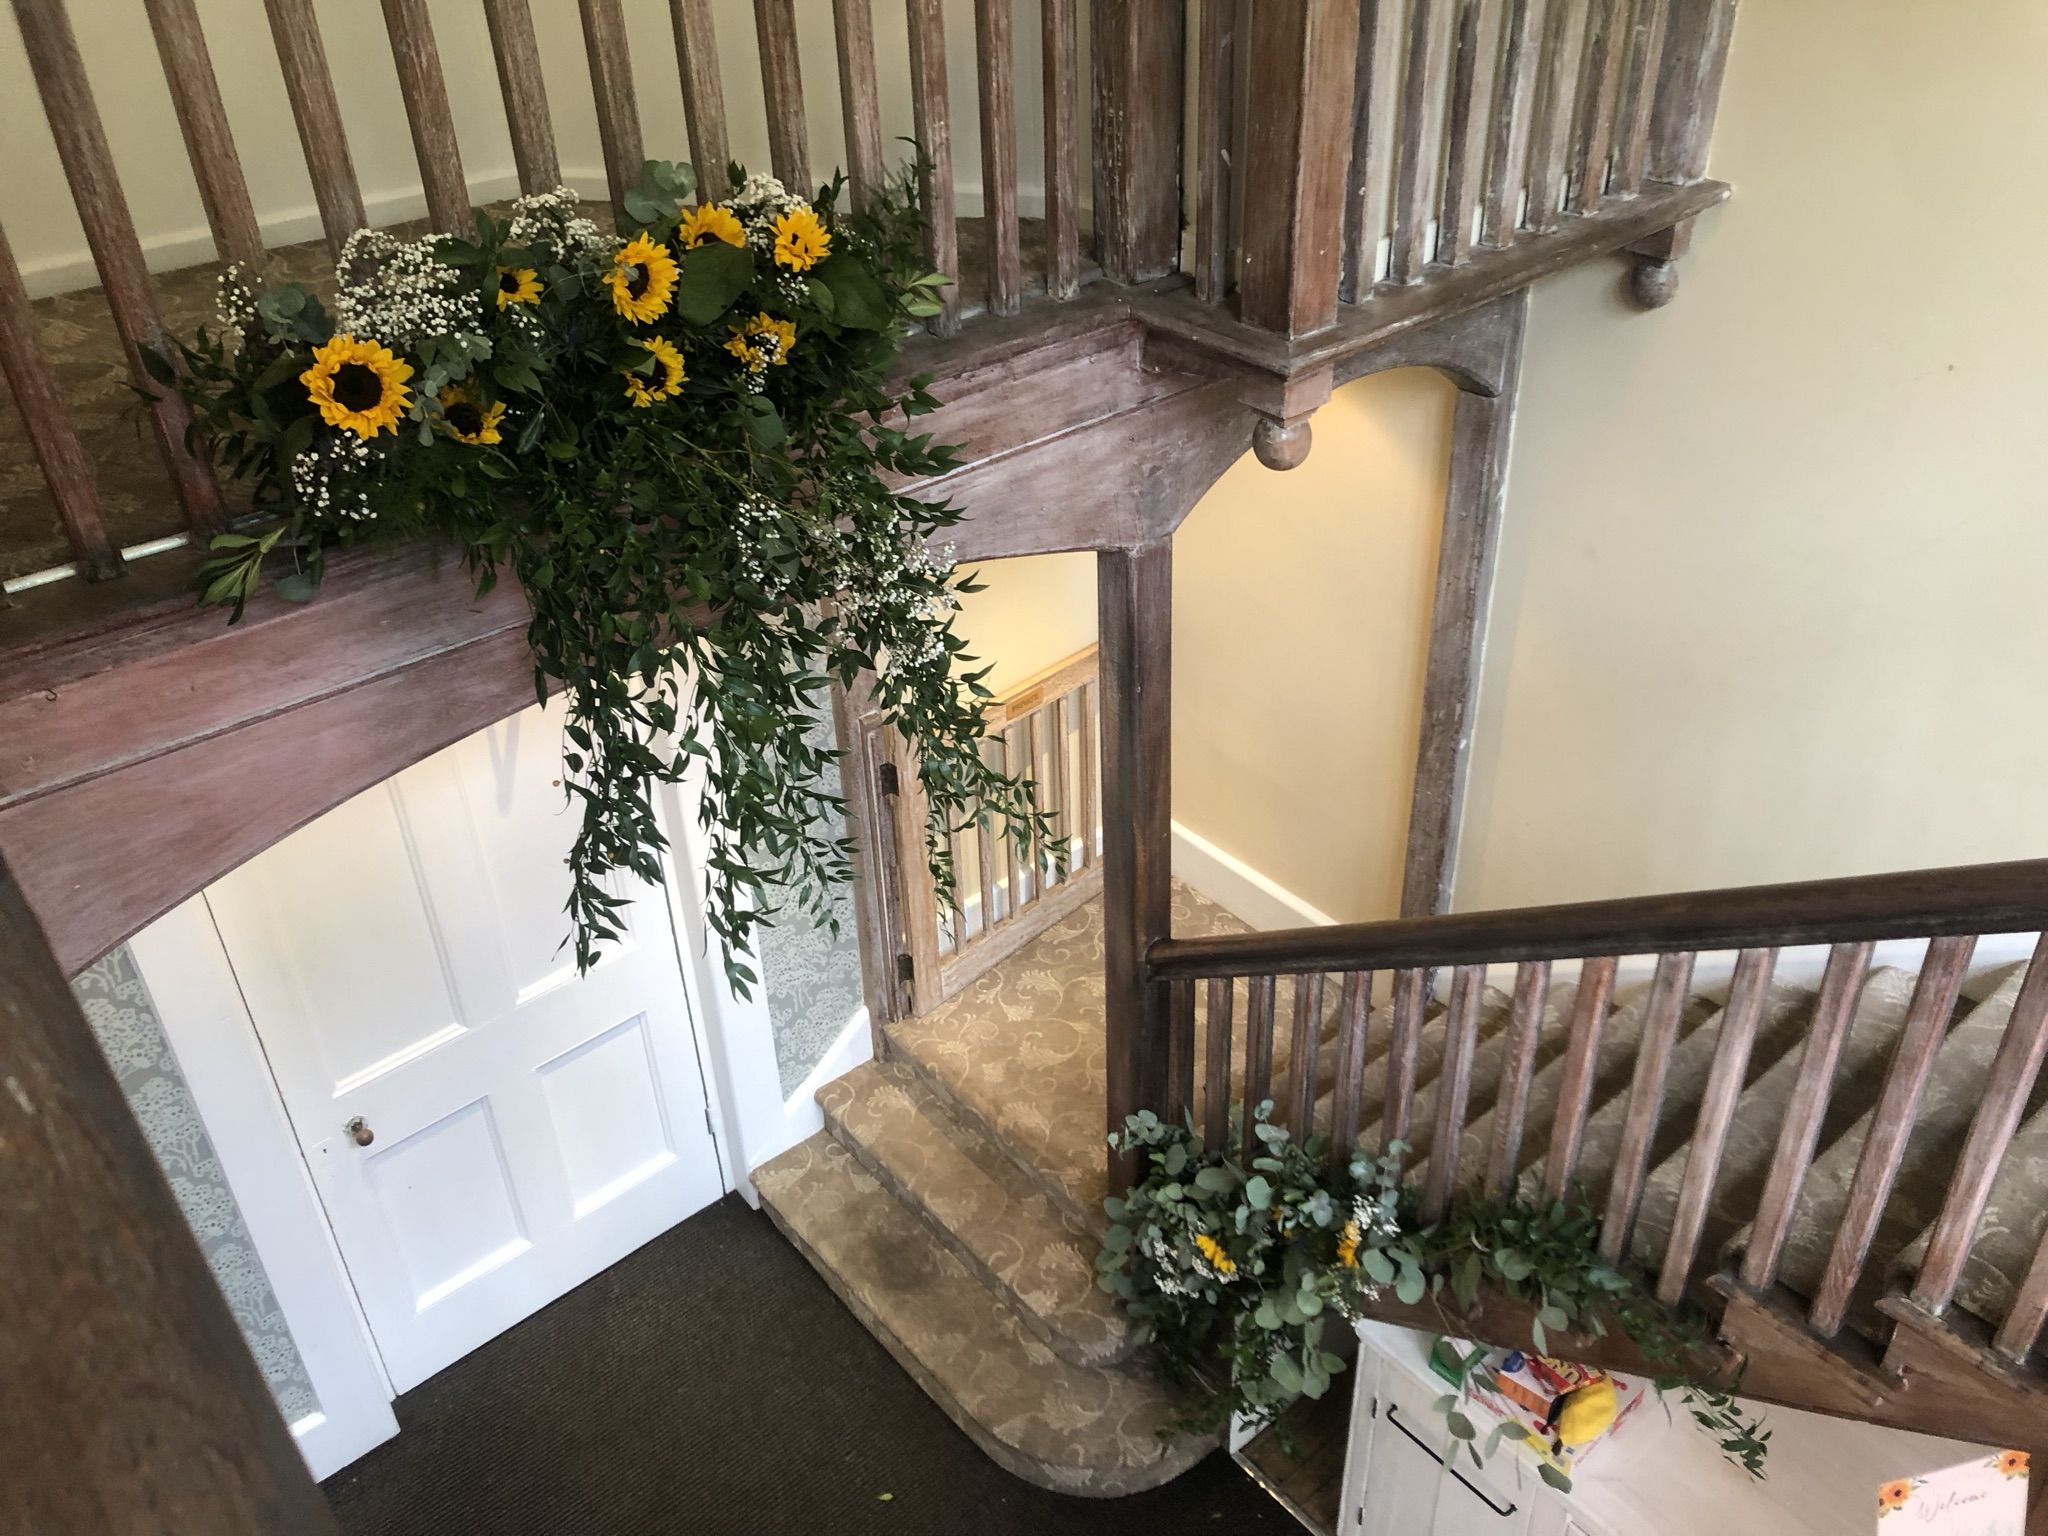 a bunch of sunflowers are hanging from a staircase.